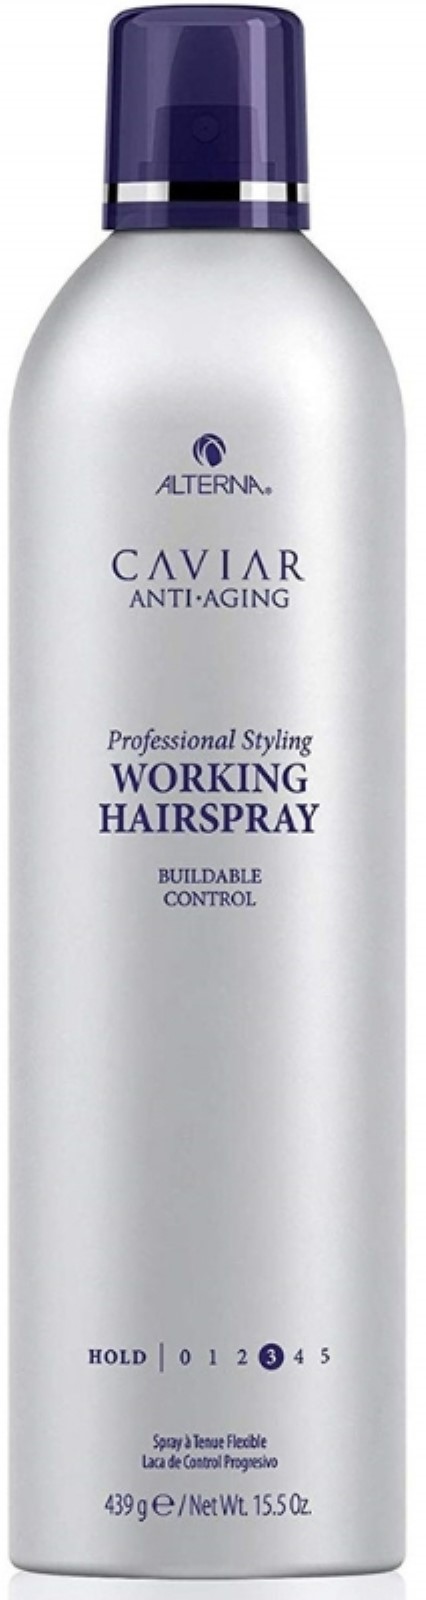 Alterna Caviar Anti-Aging Professional Styling Working Hairspray, Flexible Hold, 15.5-Ounce - image 1 of 3